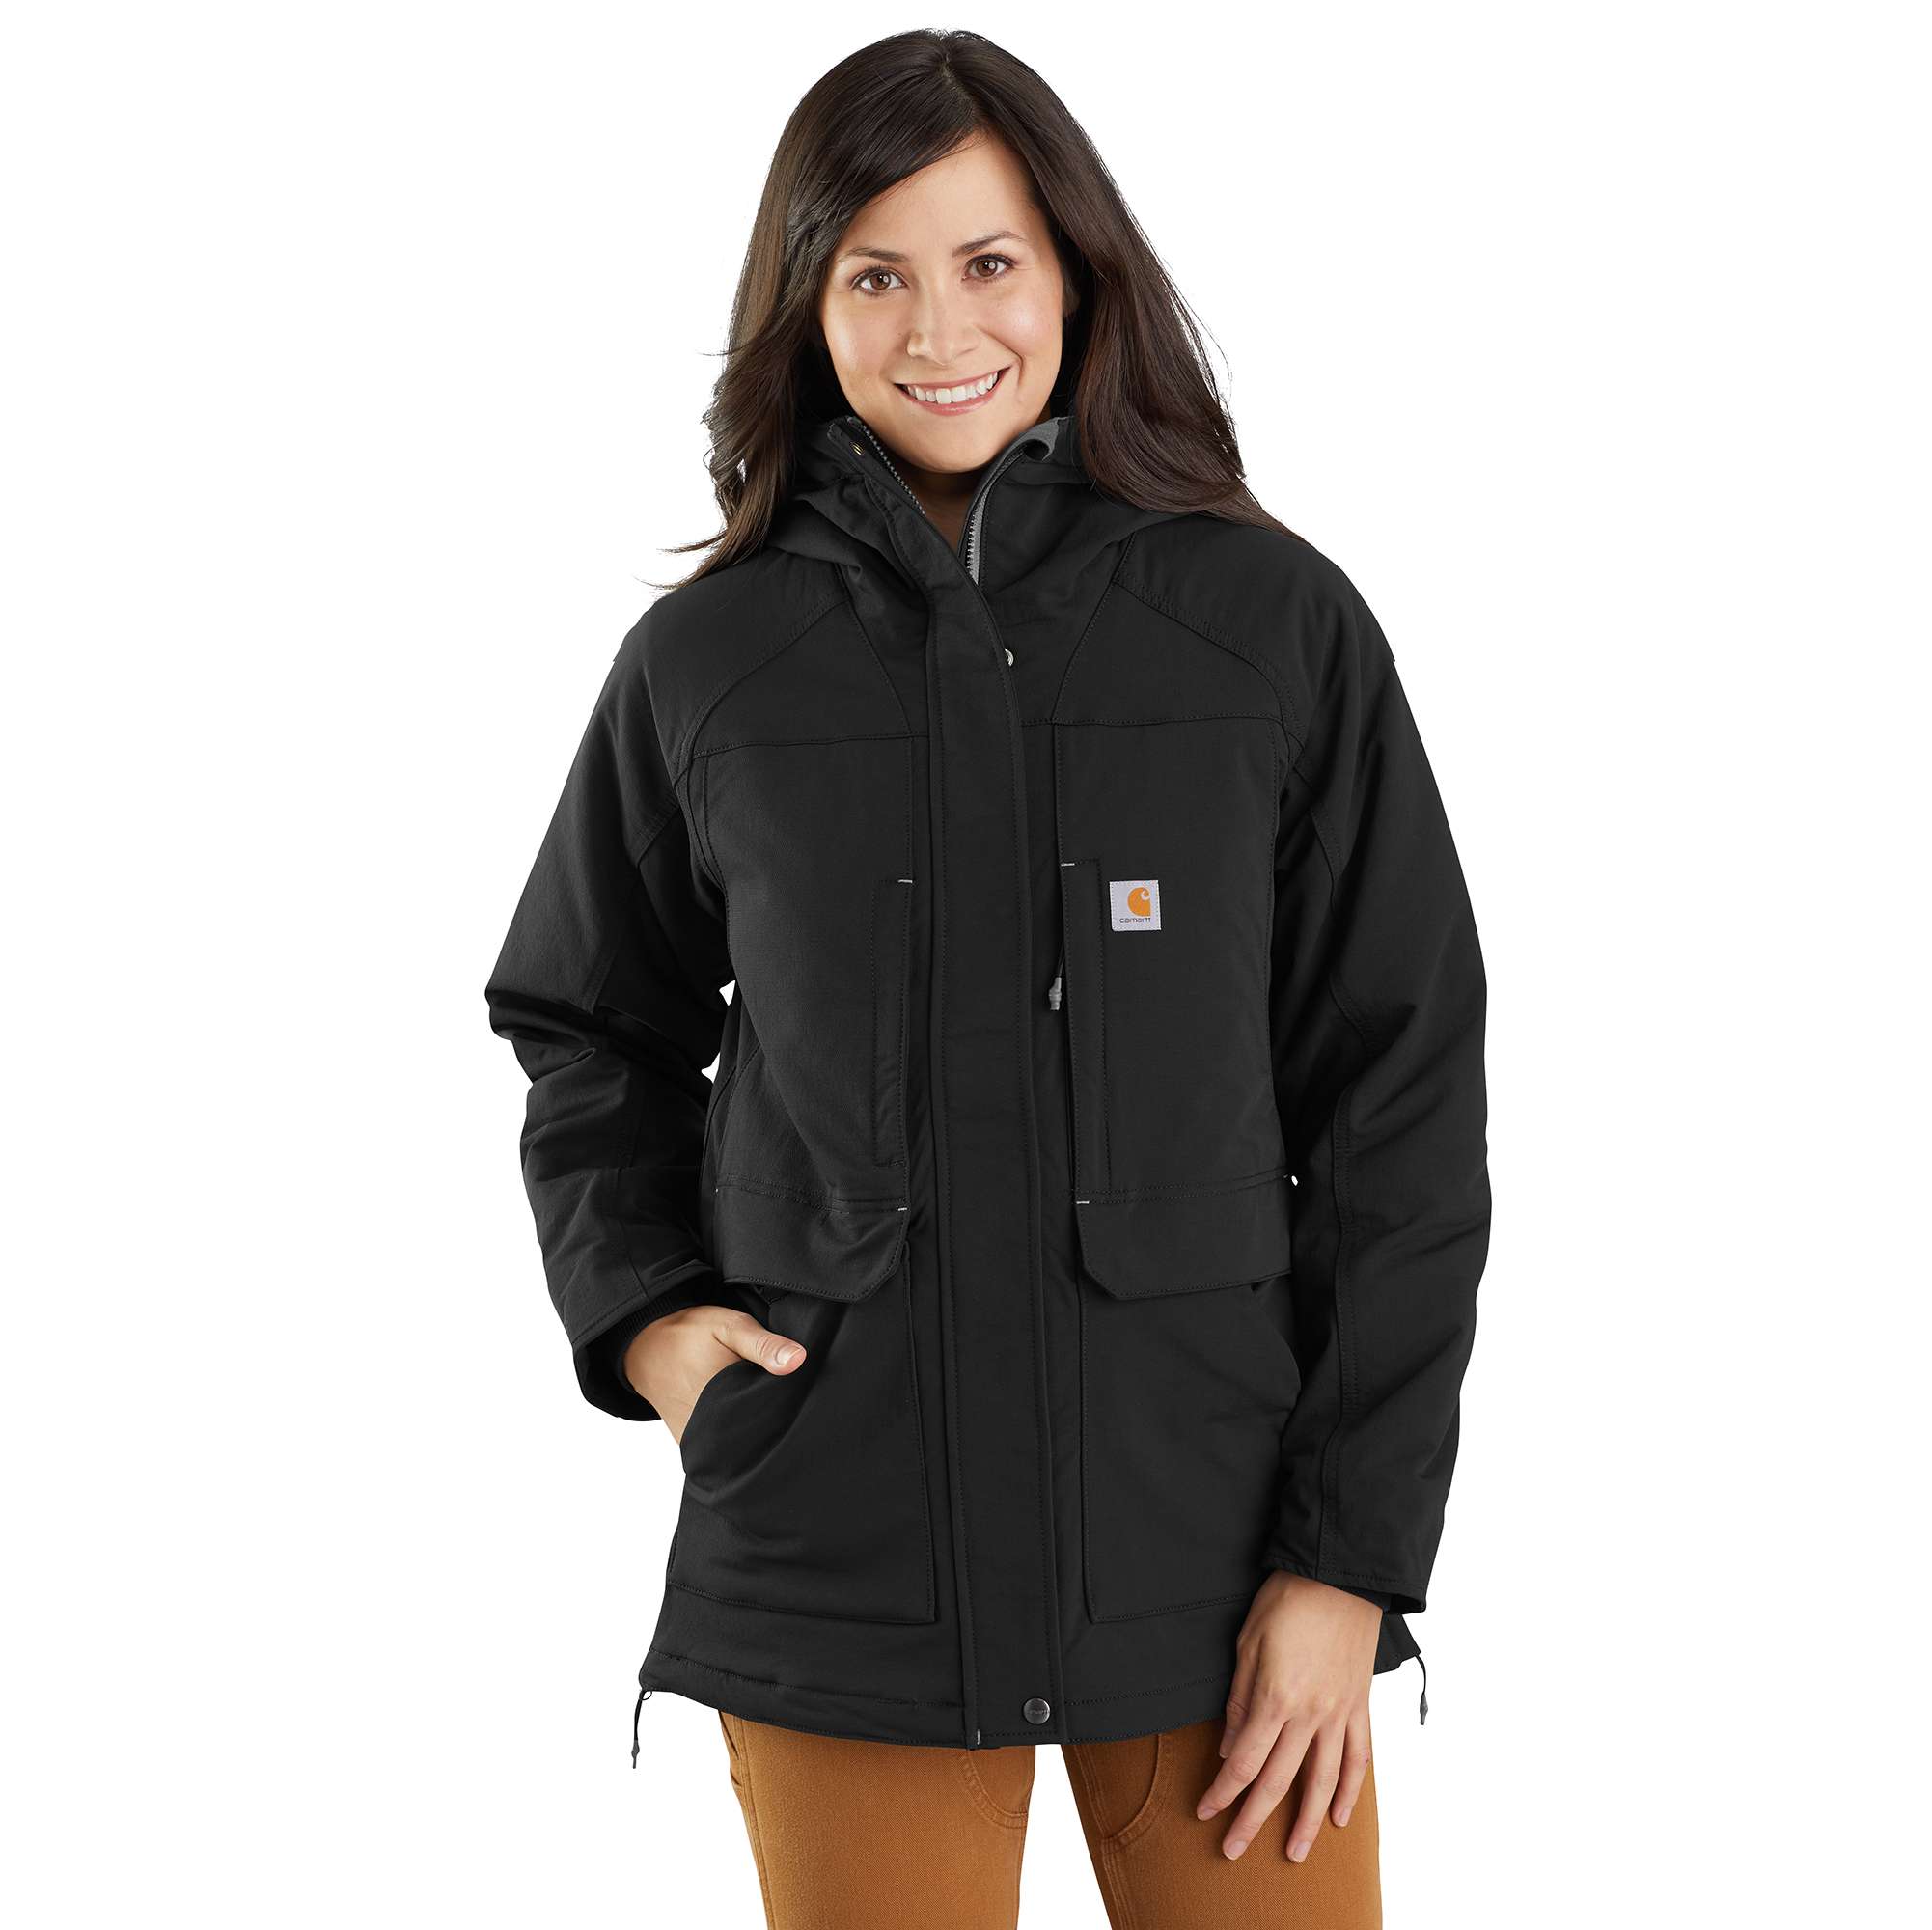 Women's Super Dux™ Tech Jacket - Relaxed Fit 4 Extreme Warmth Rating